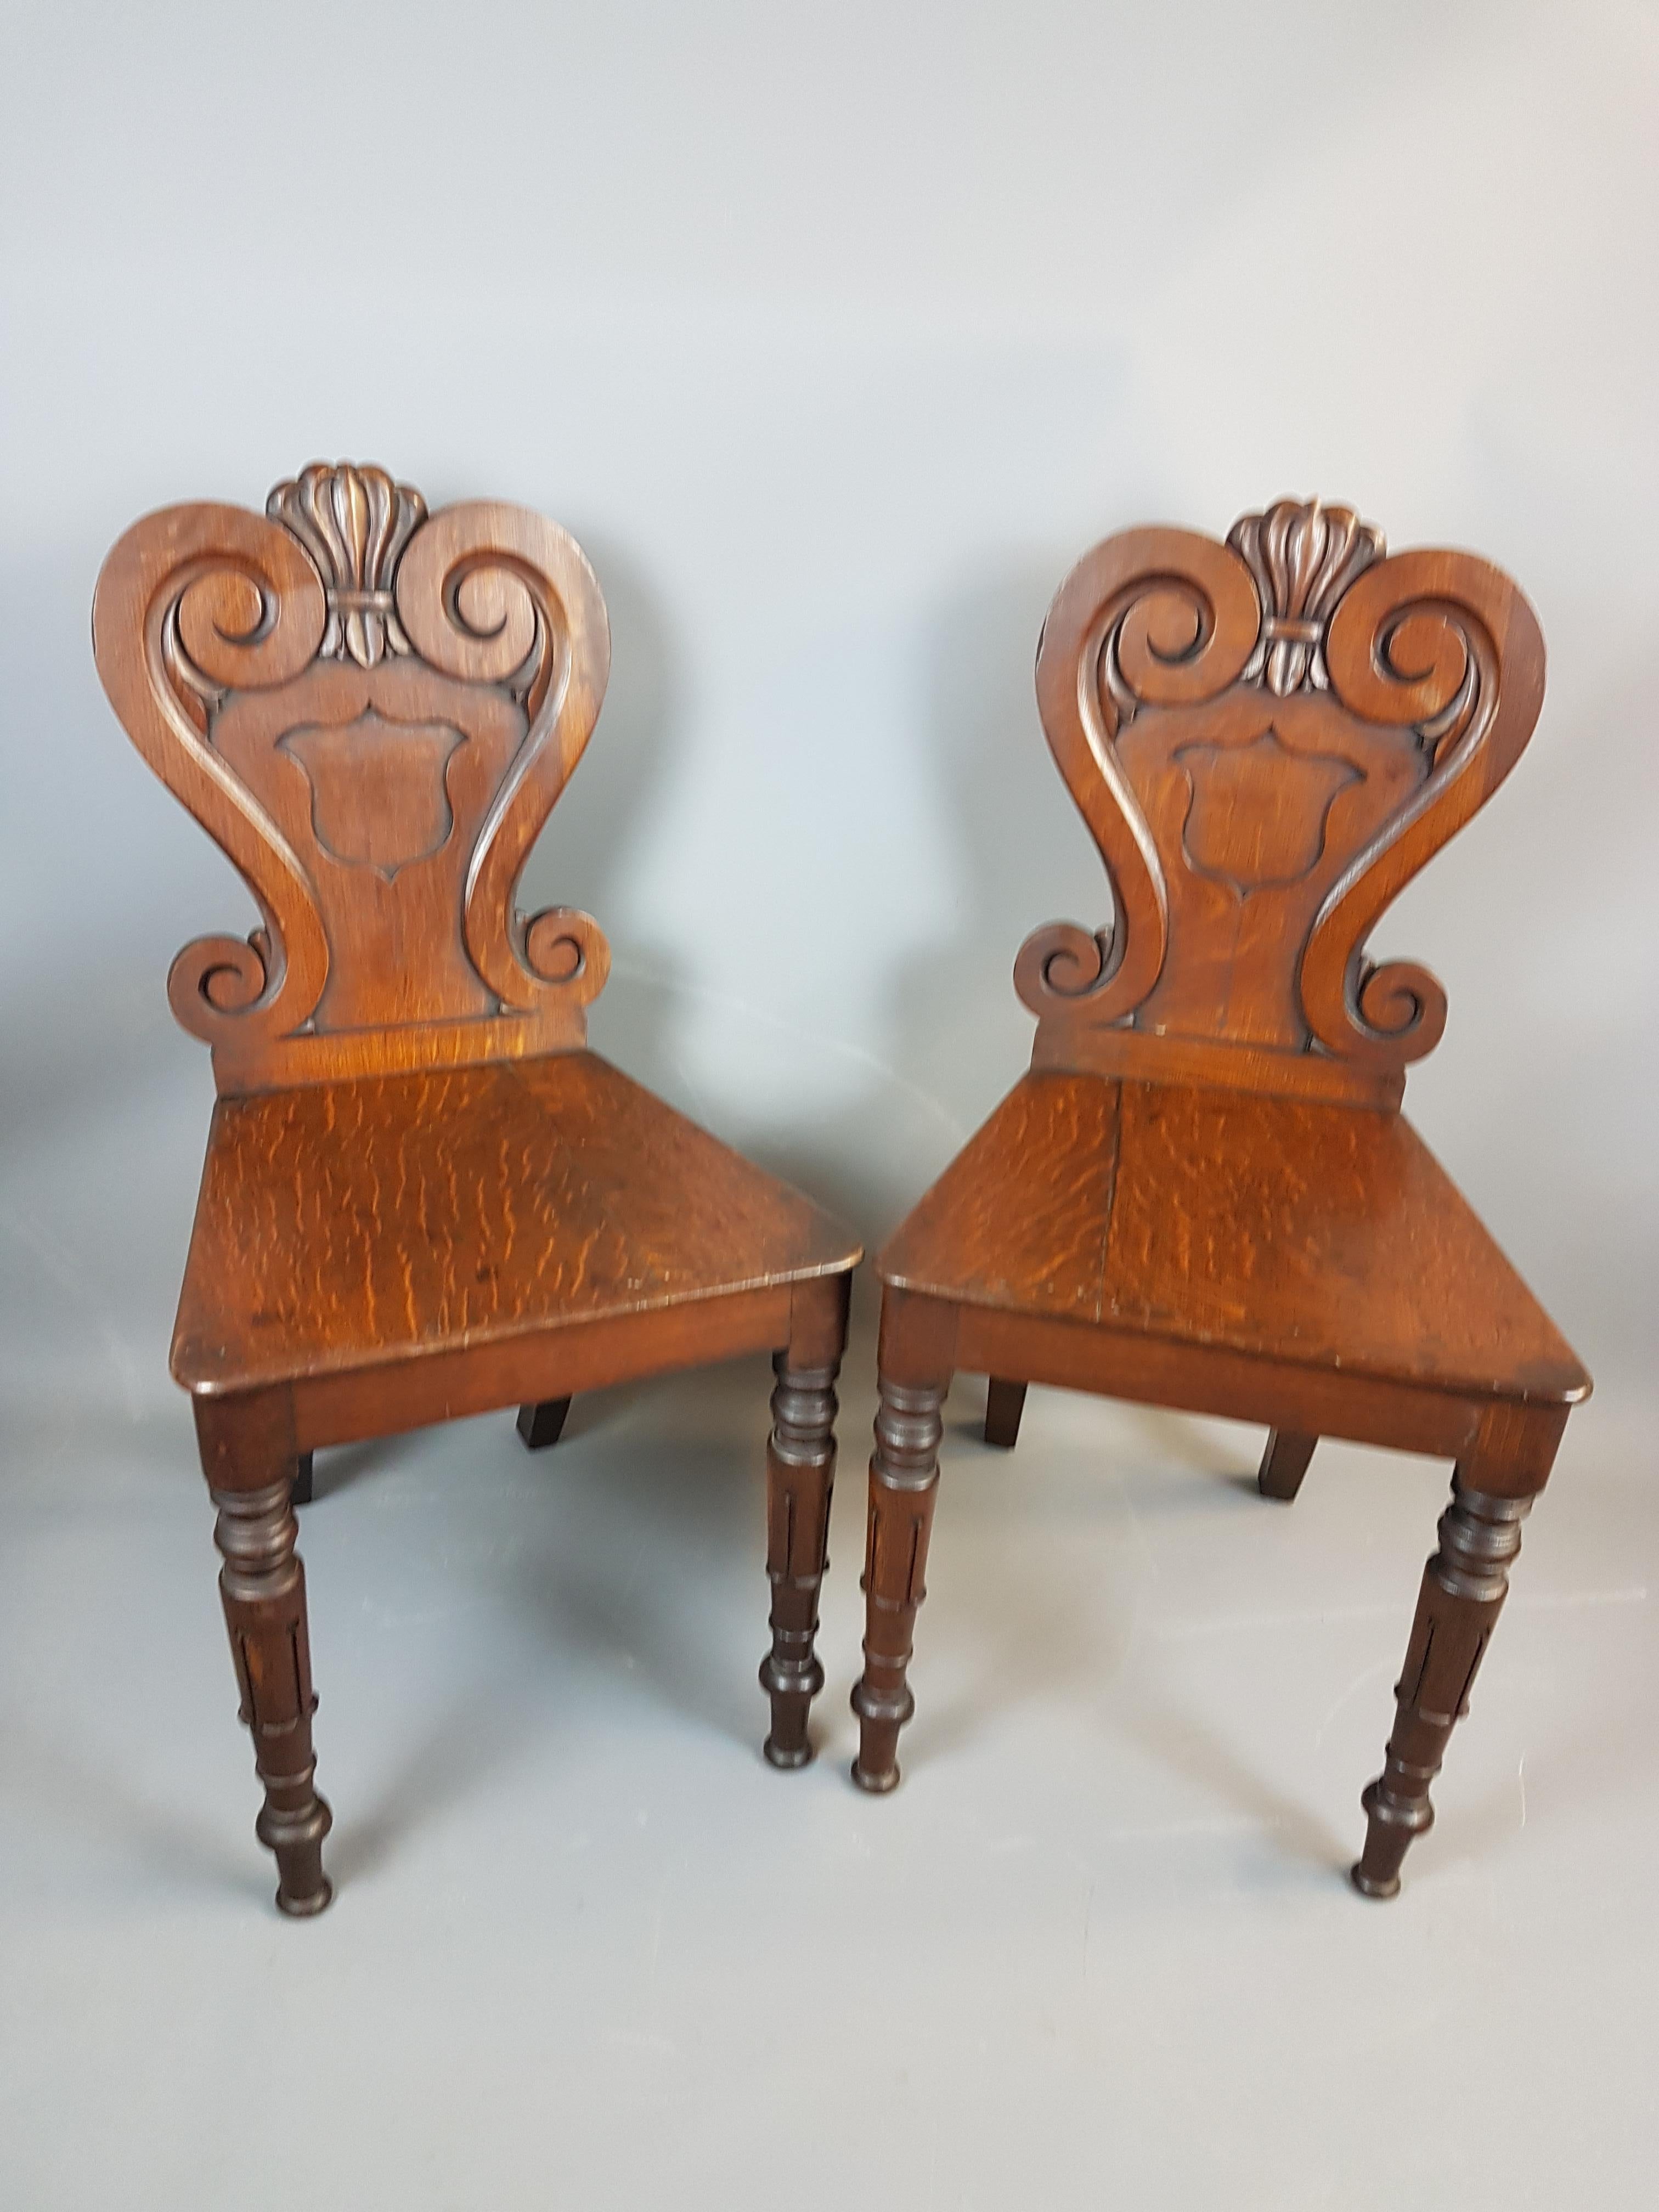 A very nice pair of 19th century William IV style oak hall chairs. These chairs are in very nice solid condition with only one leg having an old brass bracket on it, the quarter sawn grain on the oak gives a lovely decorative appeal to this pair.